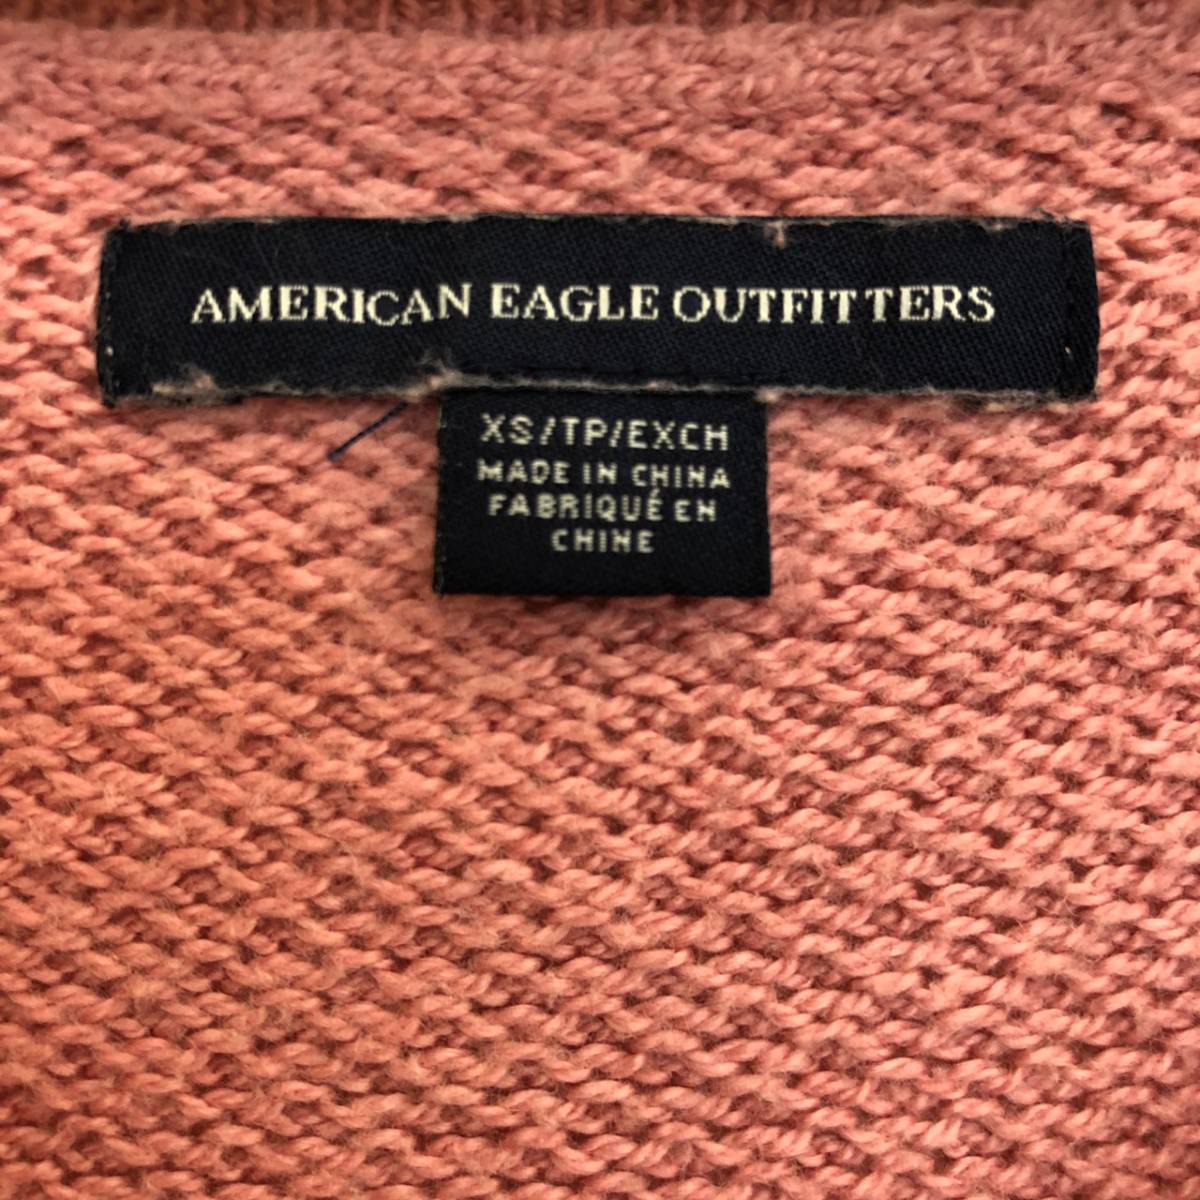 ■American Eagle Outfitters セーター 長袖 ピンク XSサイズ アメリカンイーグル アウトフィッター 